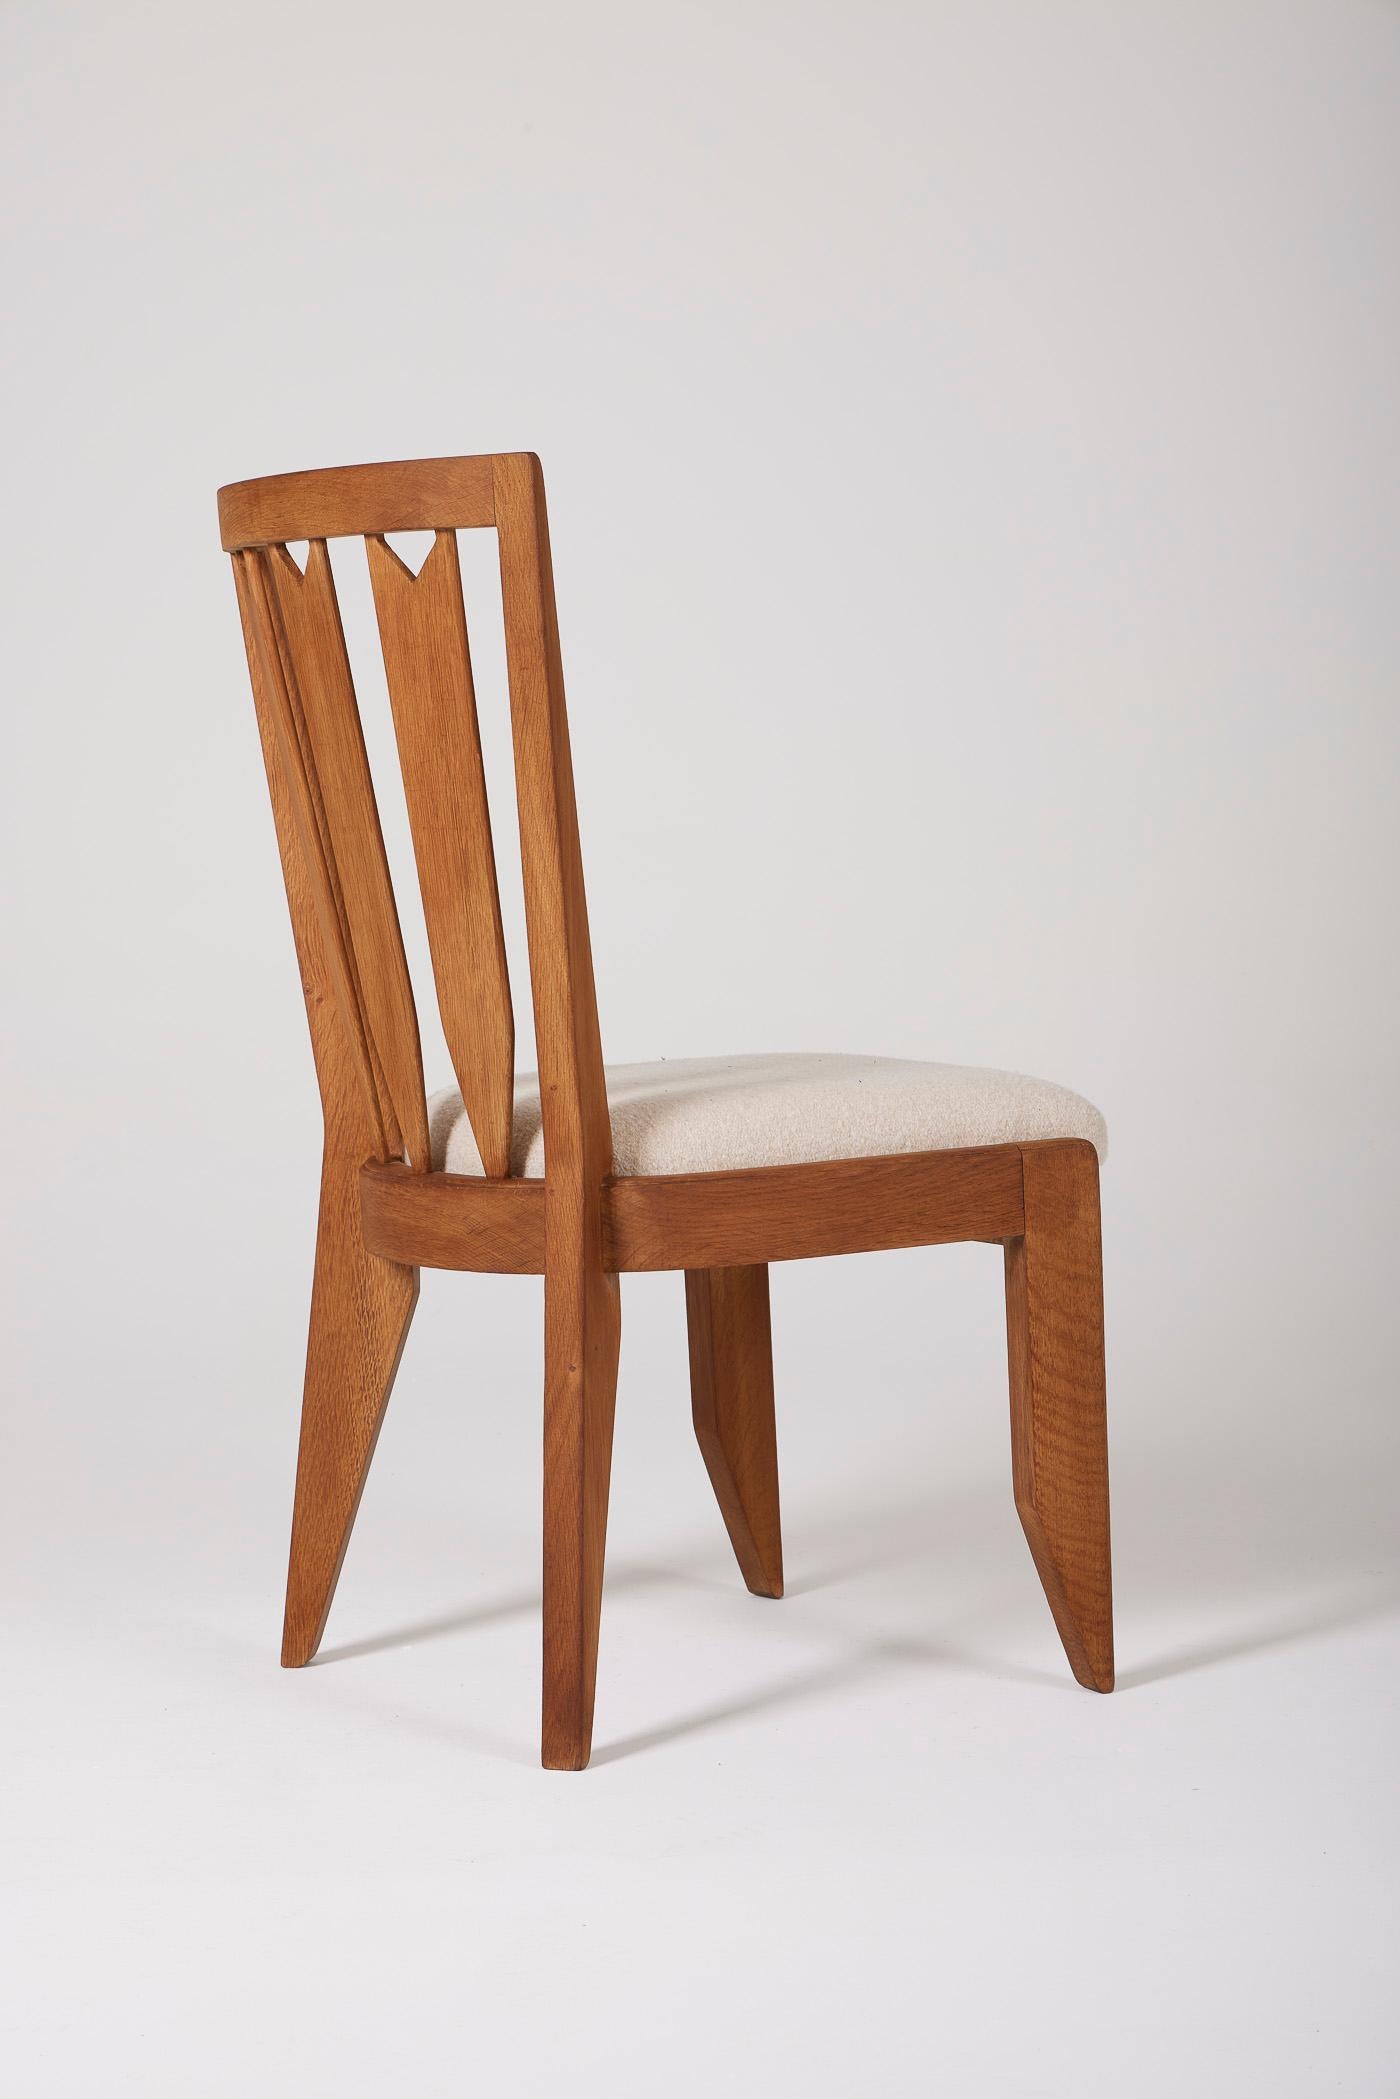 20th Century Guillerme & Chambron chair